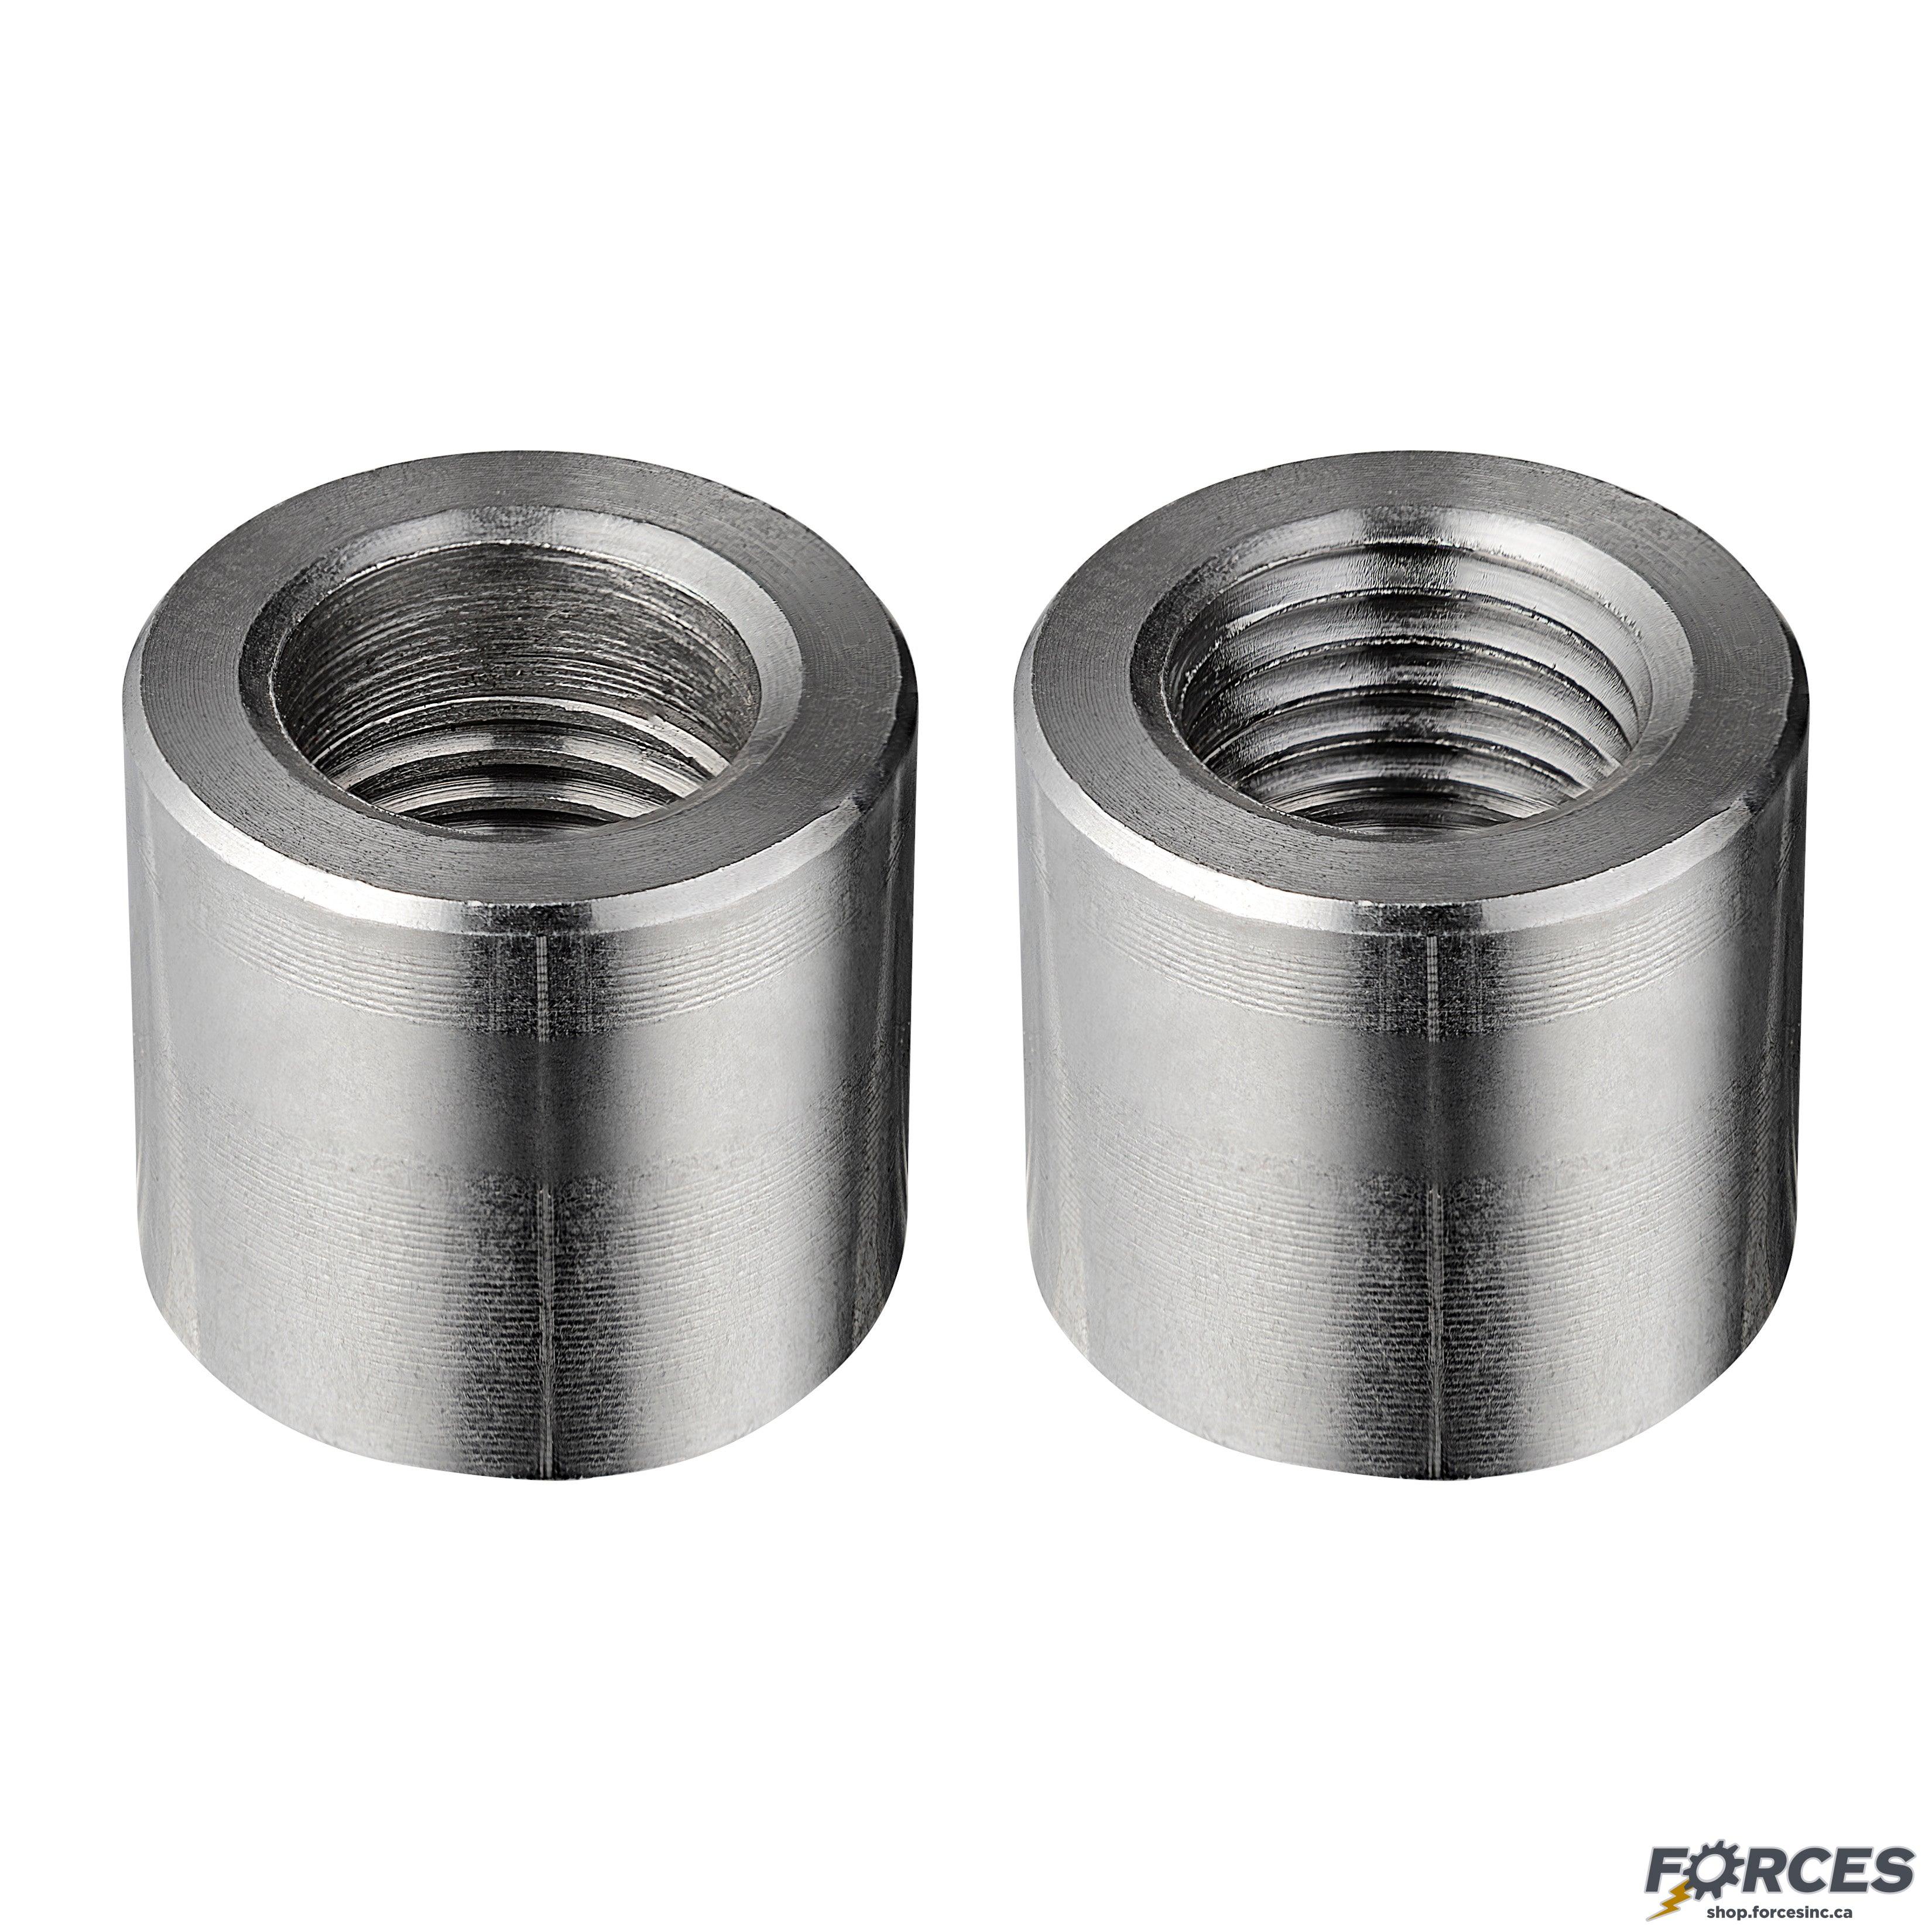 3/8" Half-Coupling NPT #3000 - Stainless Steel 316 - Forces Inc